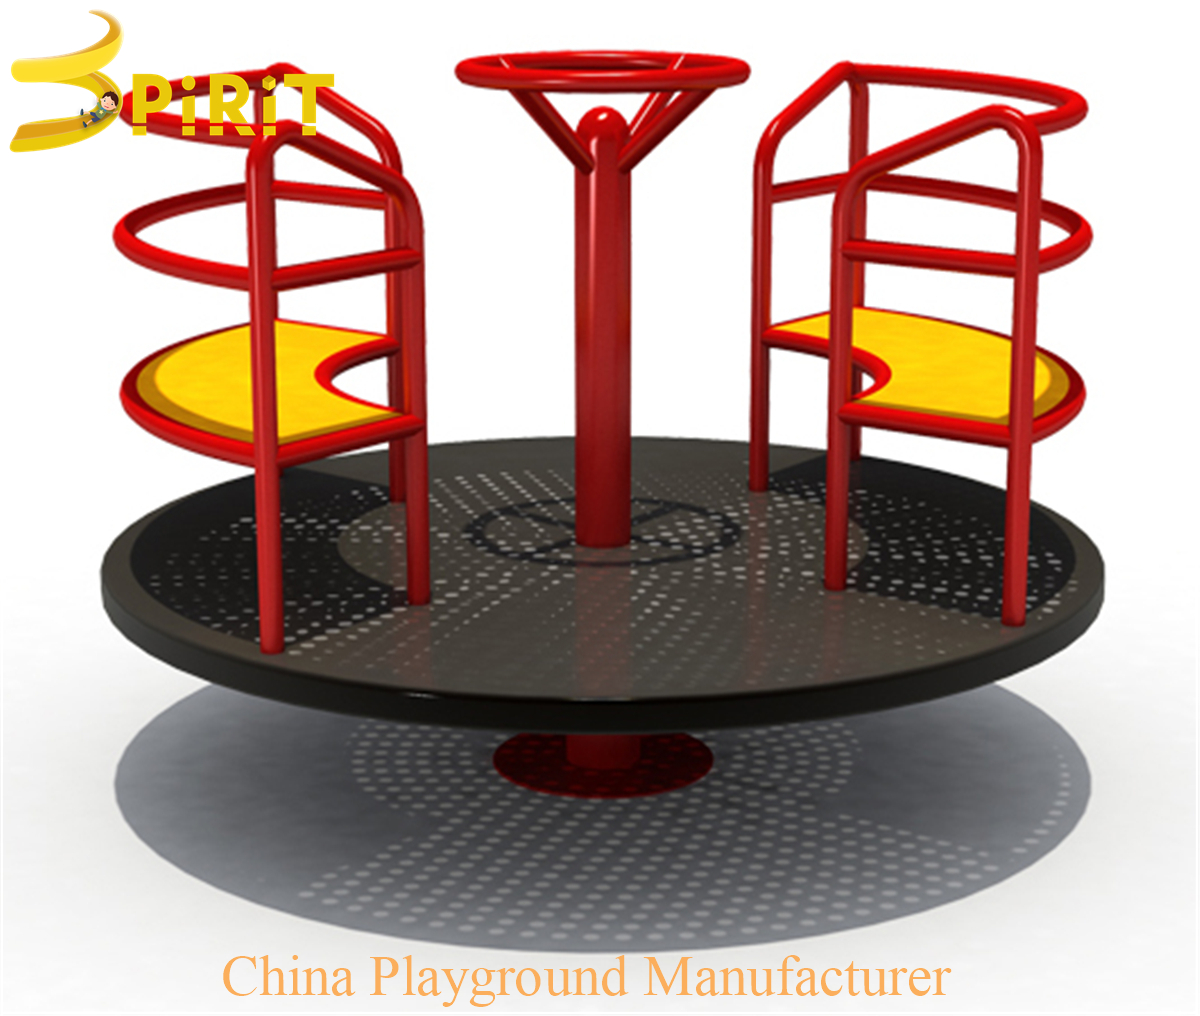 Urban large Spinning Playground Equipment outdoor activities CE safety standard-SPIRIT PLAY,Outdoor Playground, Indoor Playground,Trampoline Park,Outdoor Fitness,Inflatable,Soft Playground,Ninja Warrior,Trampoline Park,Playground Structure,Play Structure,Outdoor Fitness,Water Park,Play System,Freestanding,Interactive,independente ,Inklusibo, Park, Pagsaka sa Bungbong, Dula sa Bata